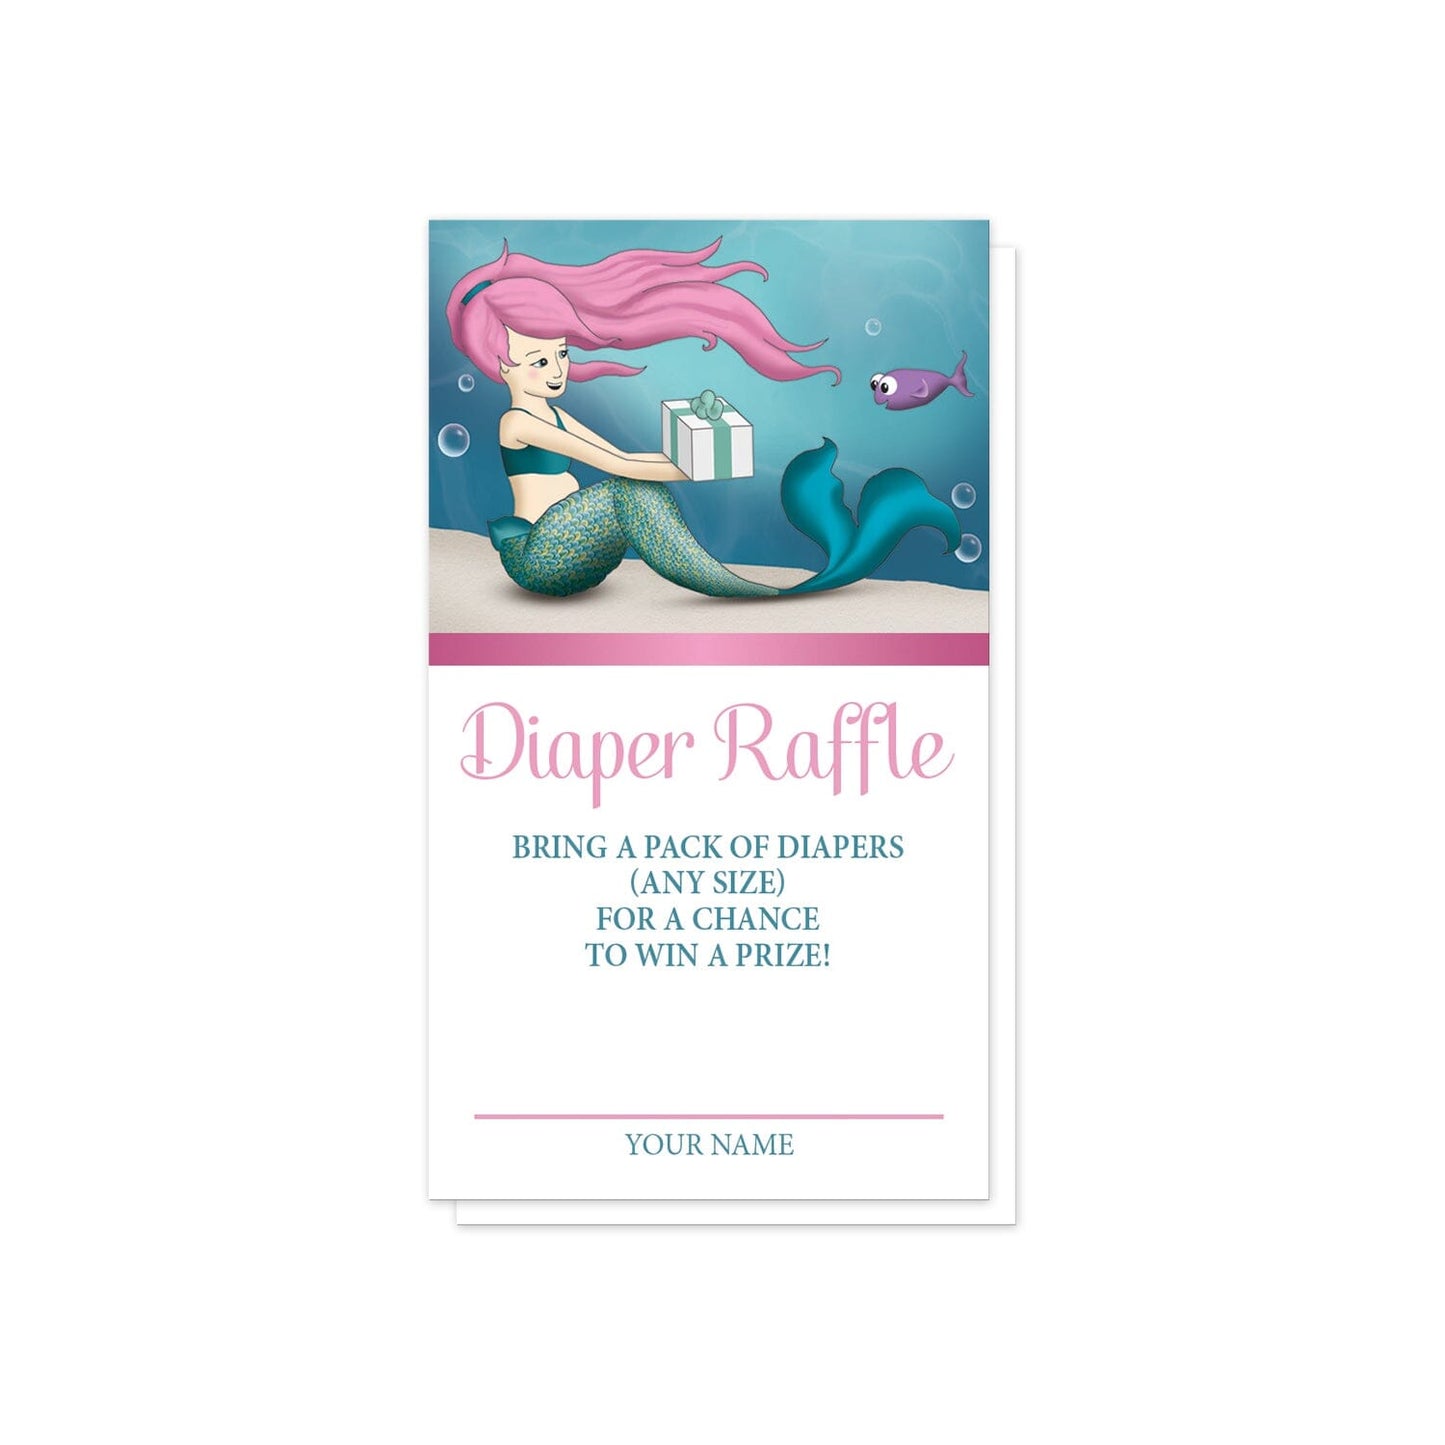 Under the Sea Mermaid Diaper Raffle Cards at Artistically Invited. Uniquely illustrated under the sea mermaid diaper raffle cards designed with an expecting mermaid with pink hair receiving a gift from a happy little purple fish at the top. Your diaper raffle details are printed in pink and turquoise on white below the mermaid design.